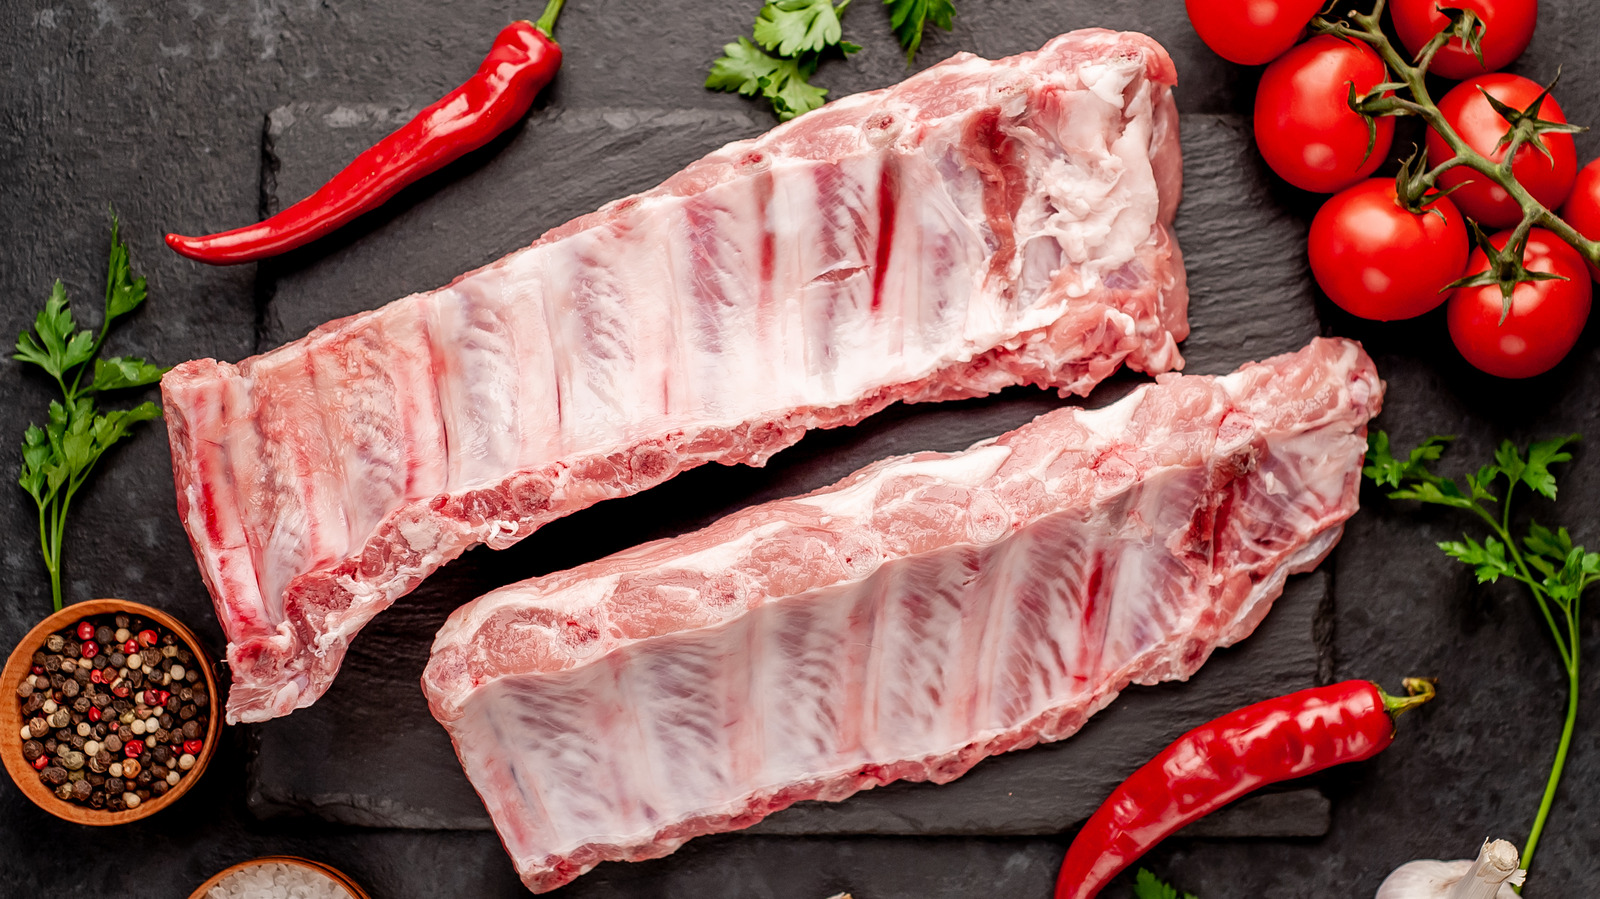 What is Beef Silver Skin?